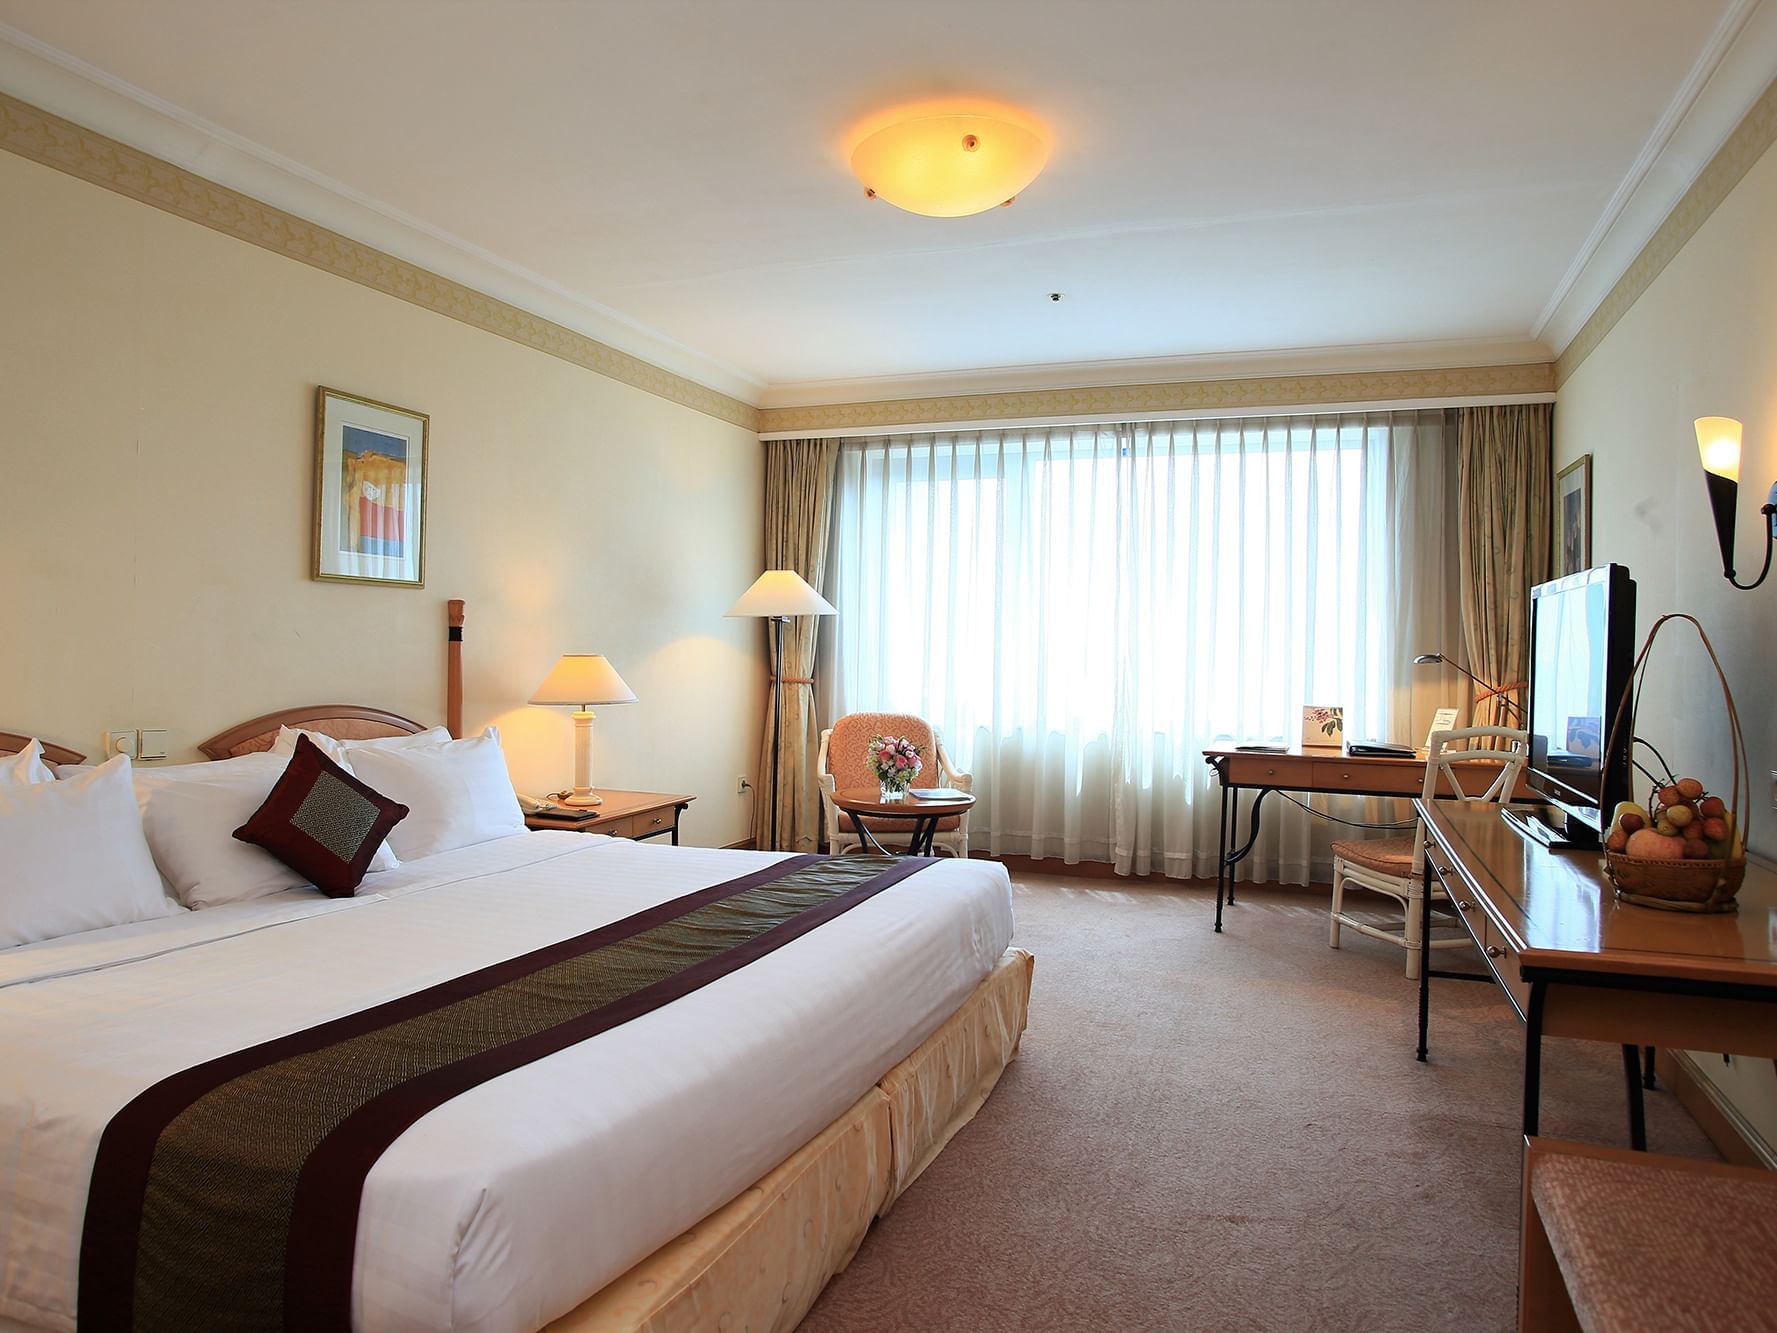 Deluxe Room with one bed & TV at Hanoi Daewoo Hotel